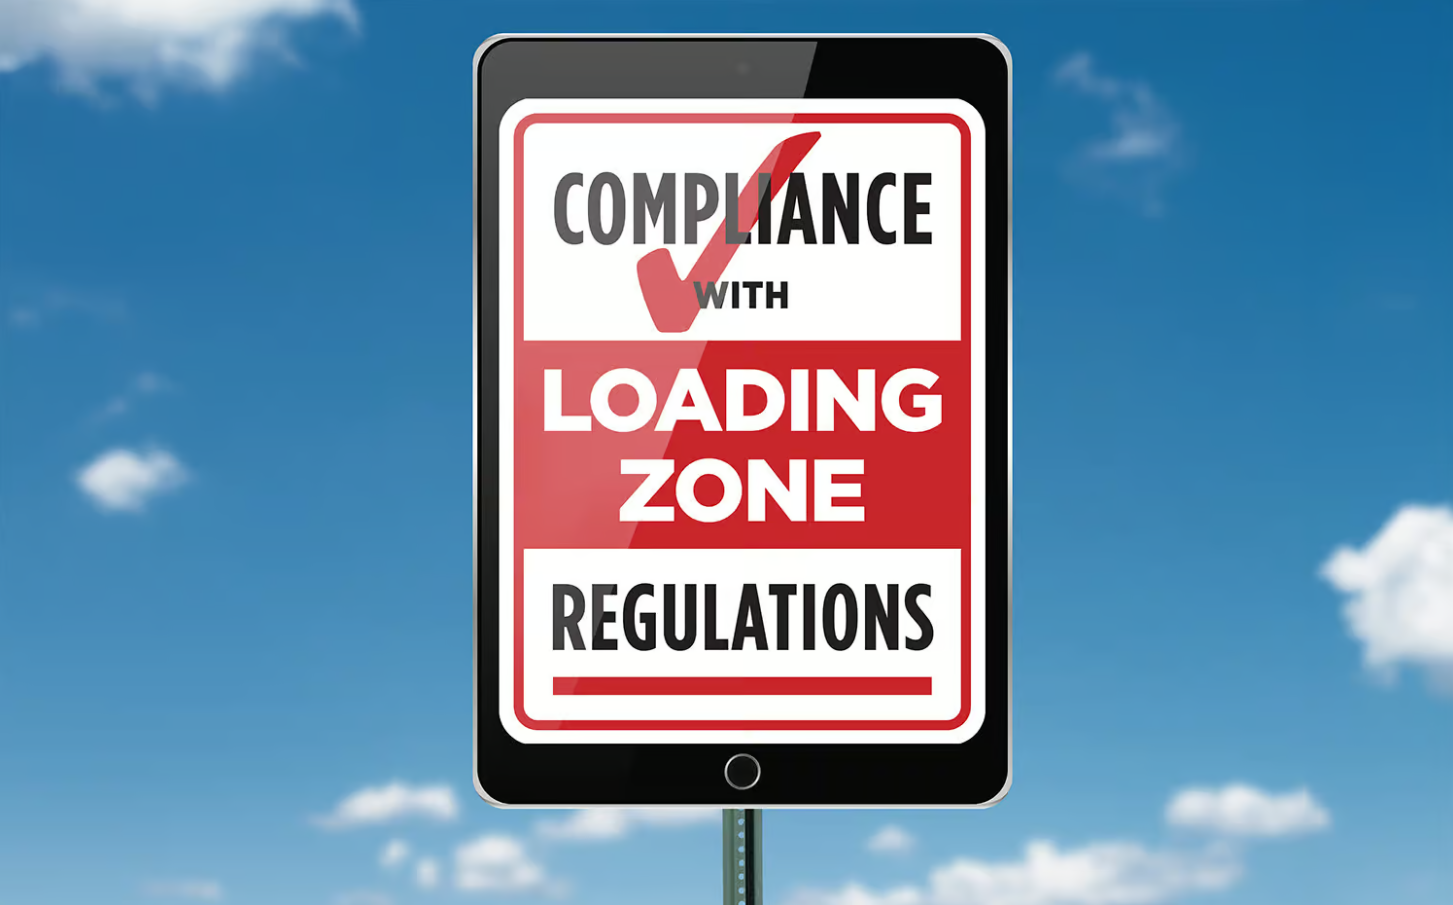 Compliance with Loading Zone Regulations: Using Technology to Reduce Chaos and Pollution  